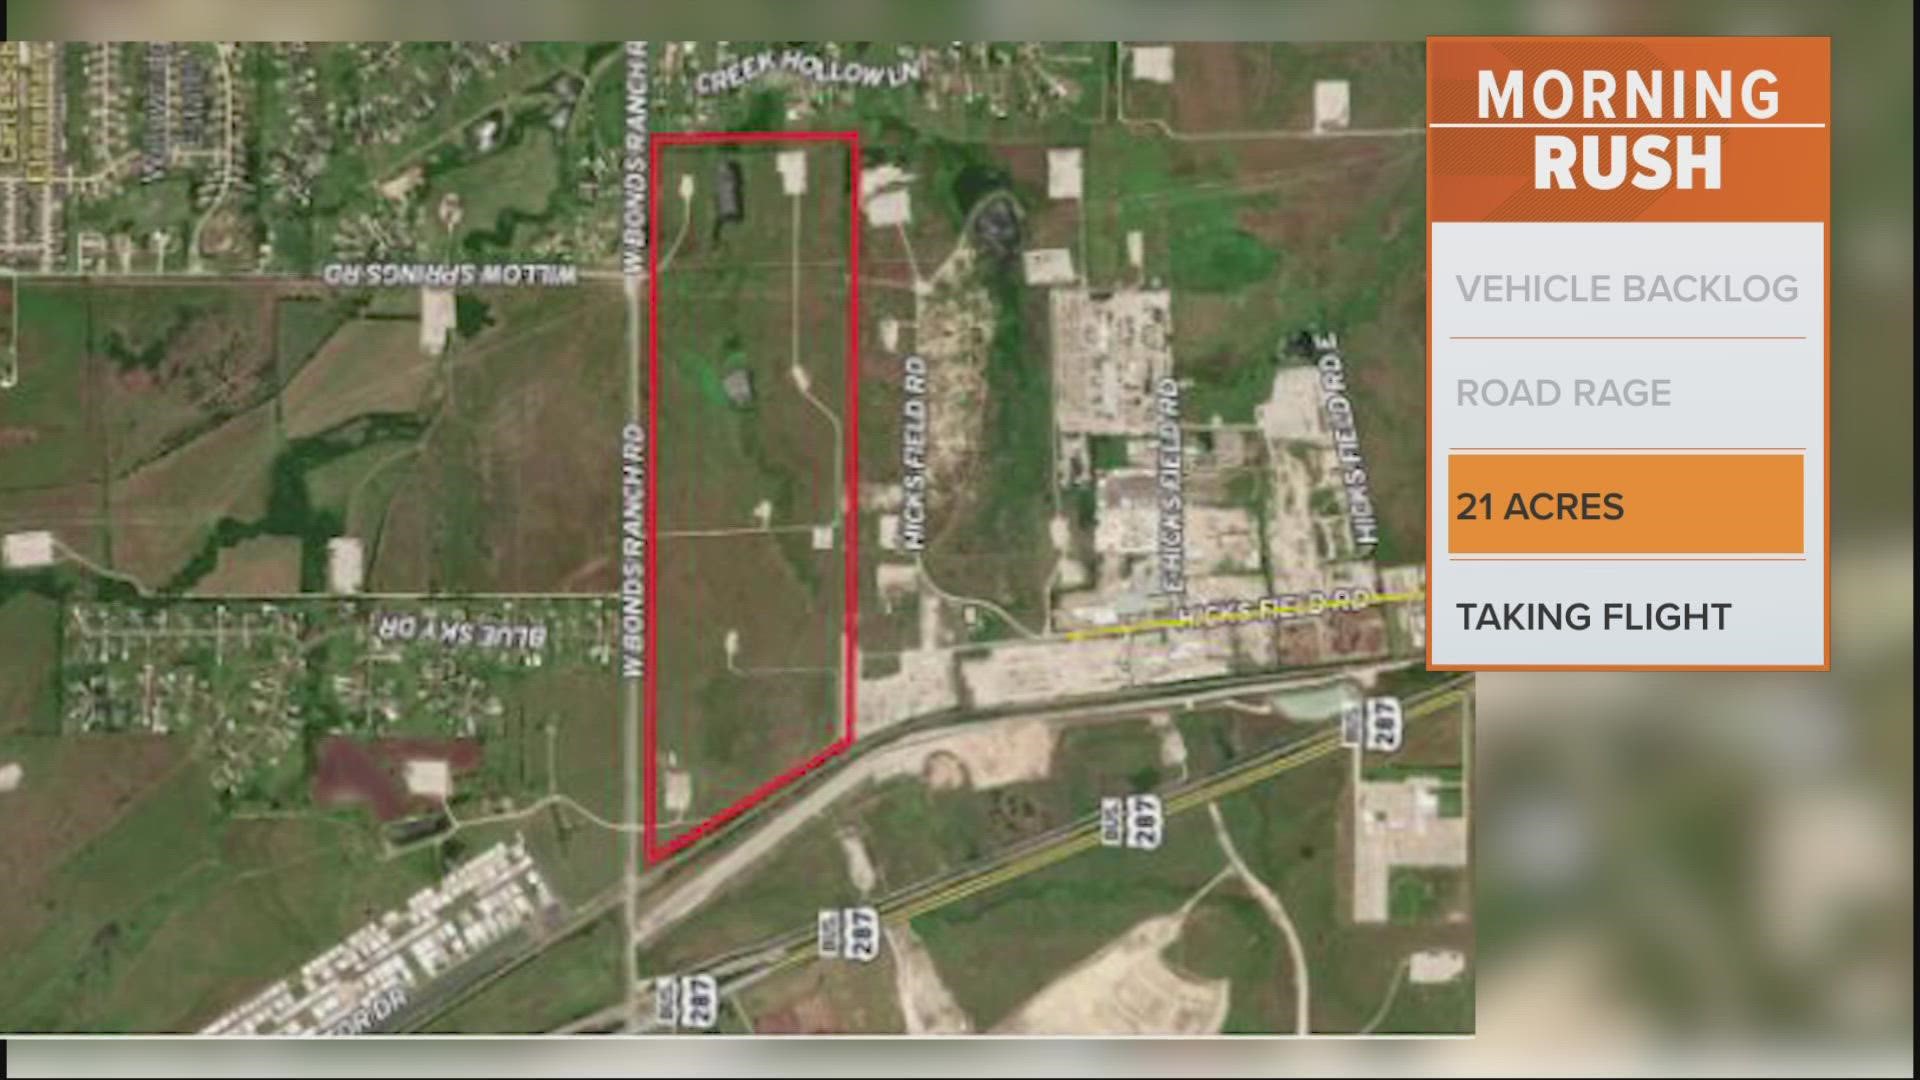 Avon Holdings has purchased 21 acres along West Bonds Ranch Road near Hicks Airfield.